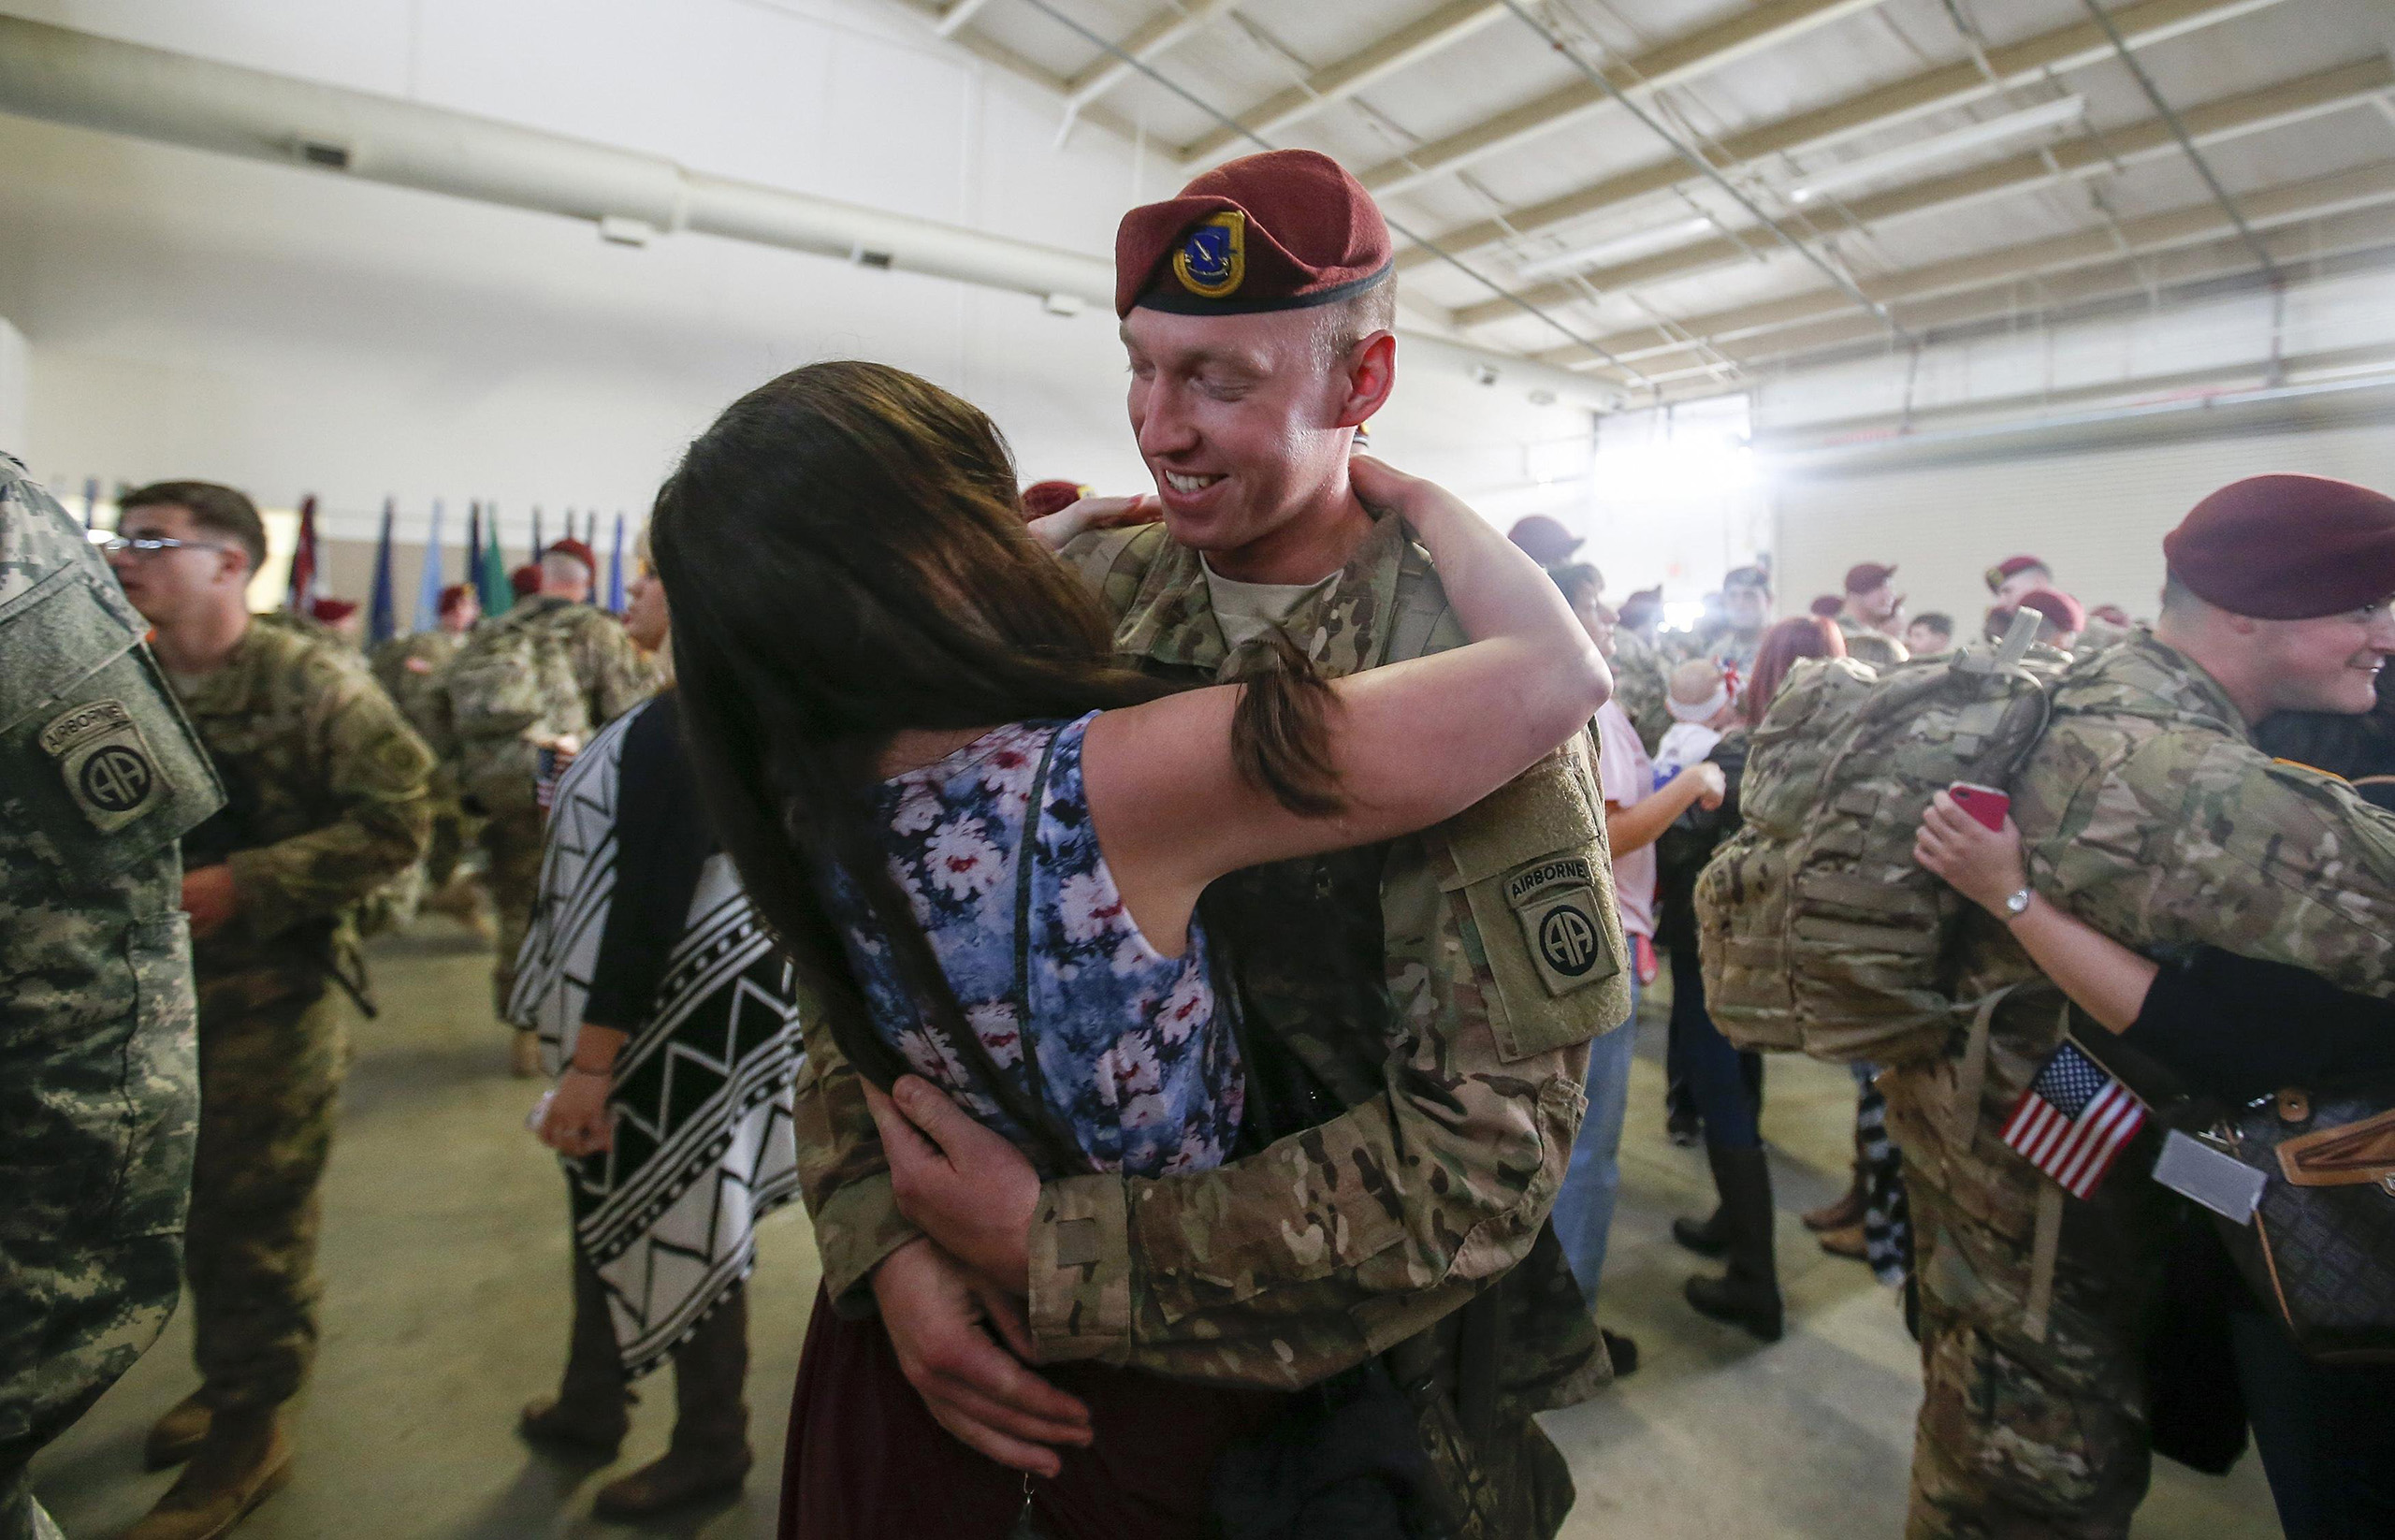 A paratrooper with the 1st Brigade Combat Team, 82nd Airborne Division, hugs his wife after returning home from Afghanistan at Pope Army Airfield in Fort Bragg, North Carolina on Nov. 5, 2014.